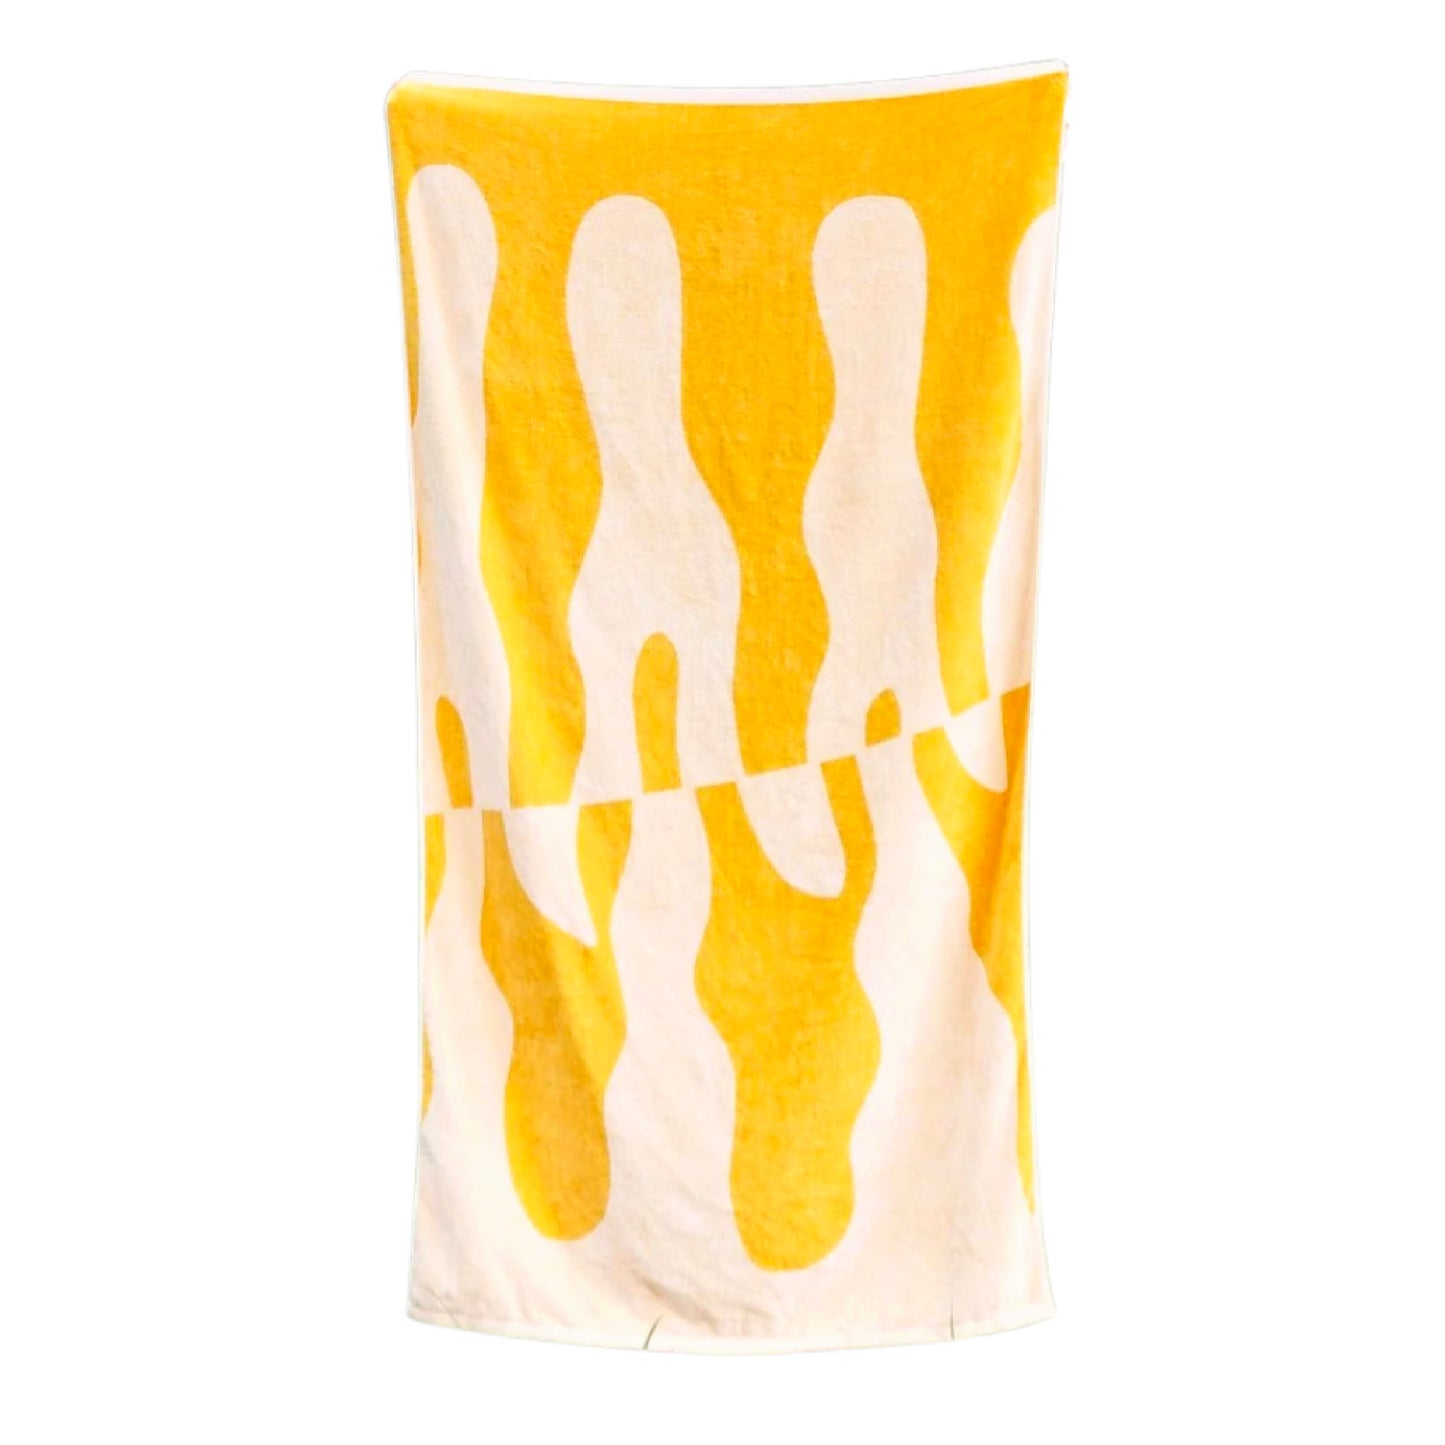 TOWEL BLANKET : The hottest fire / yellow